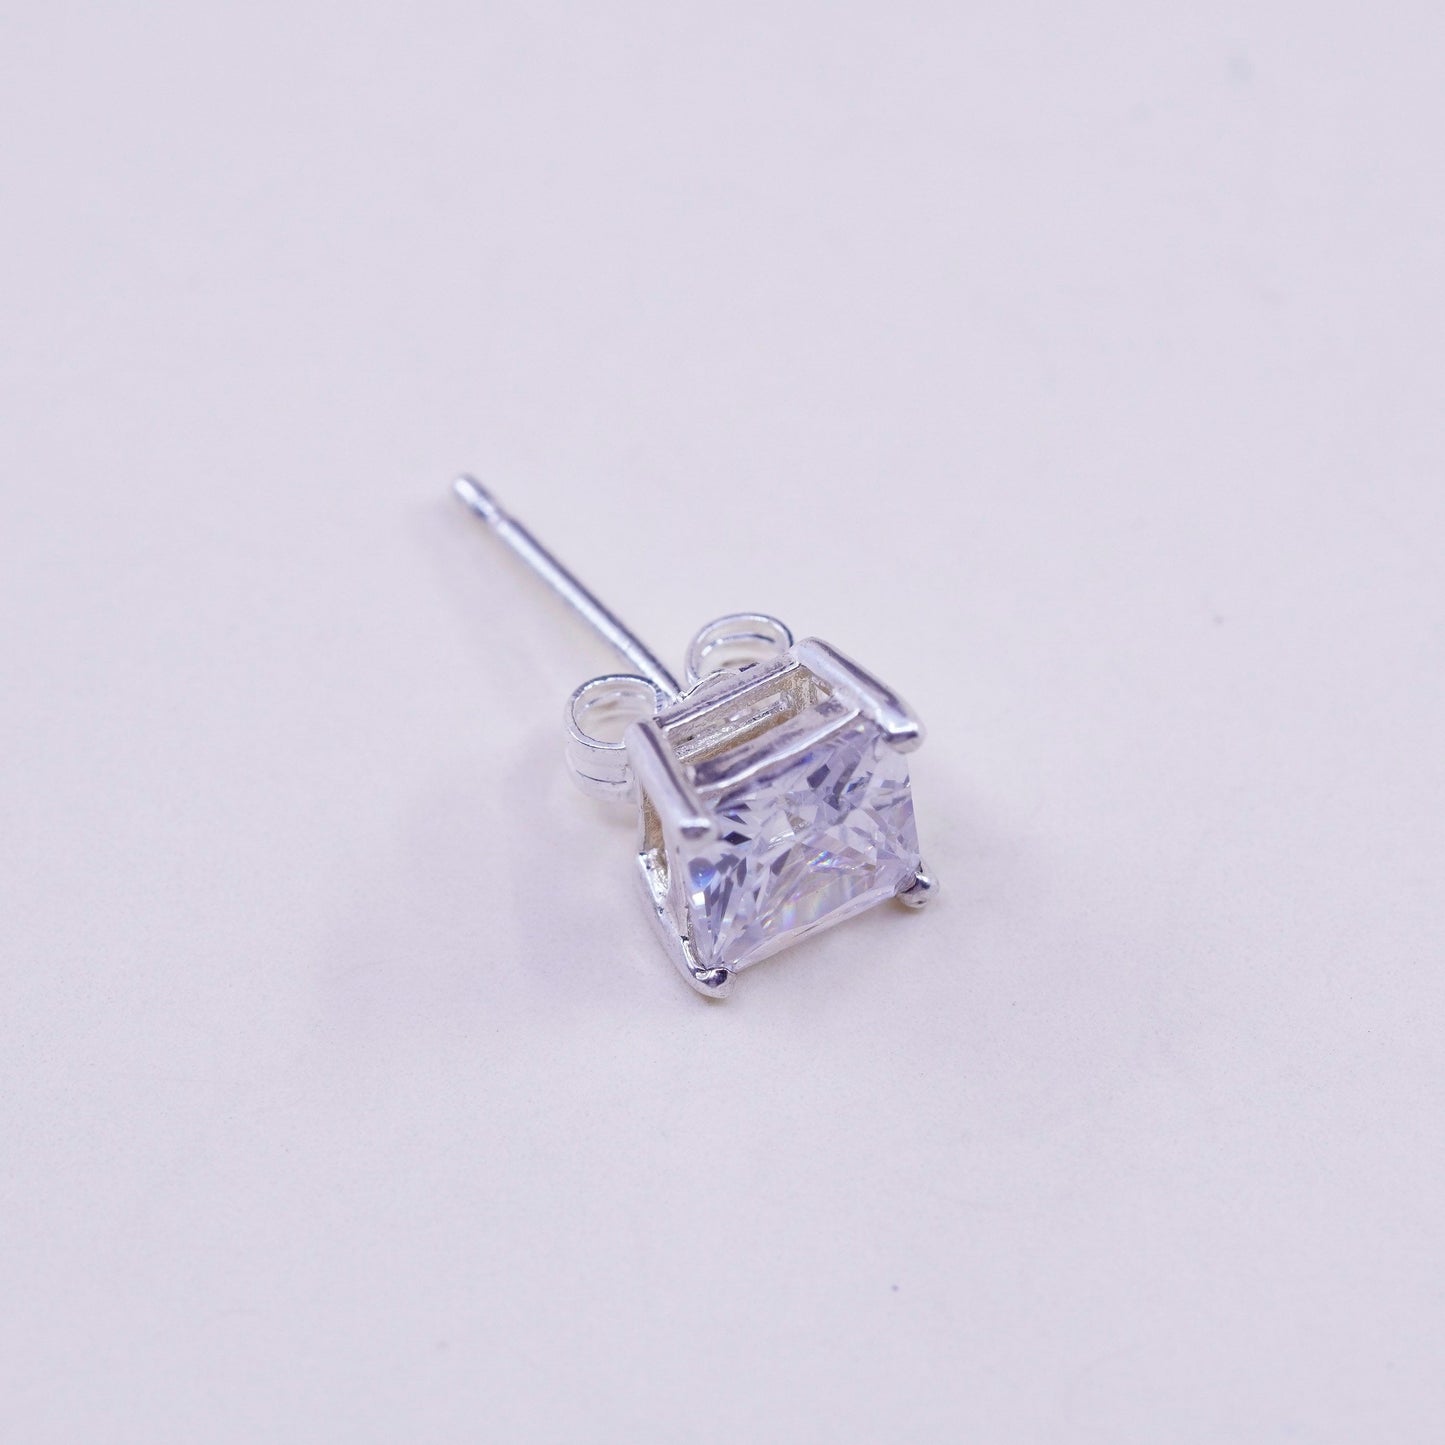 Vintage sterling 925 silver square cz studs, earrings